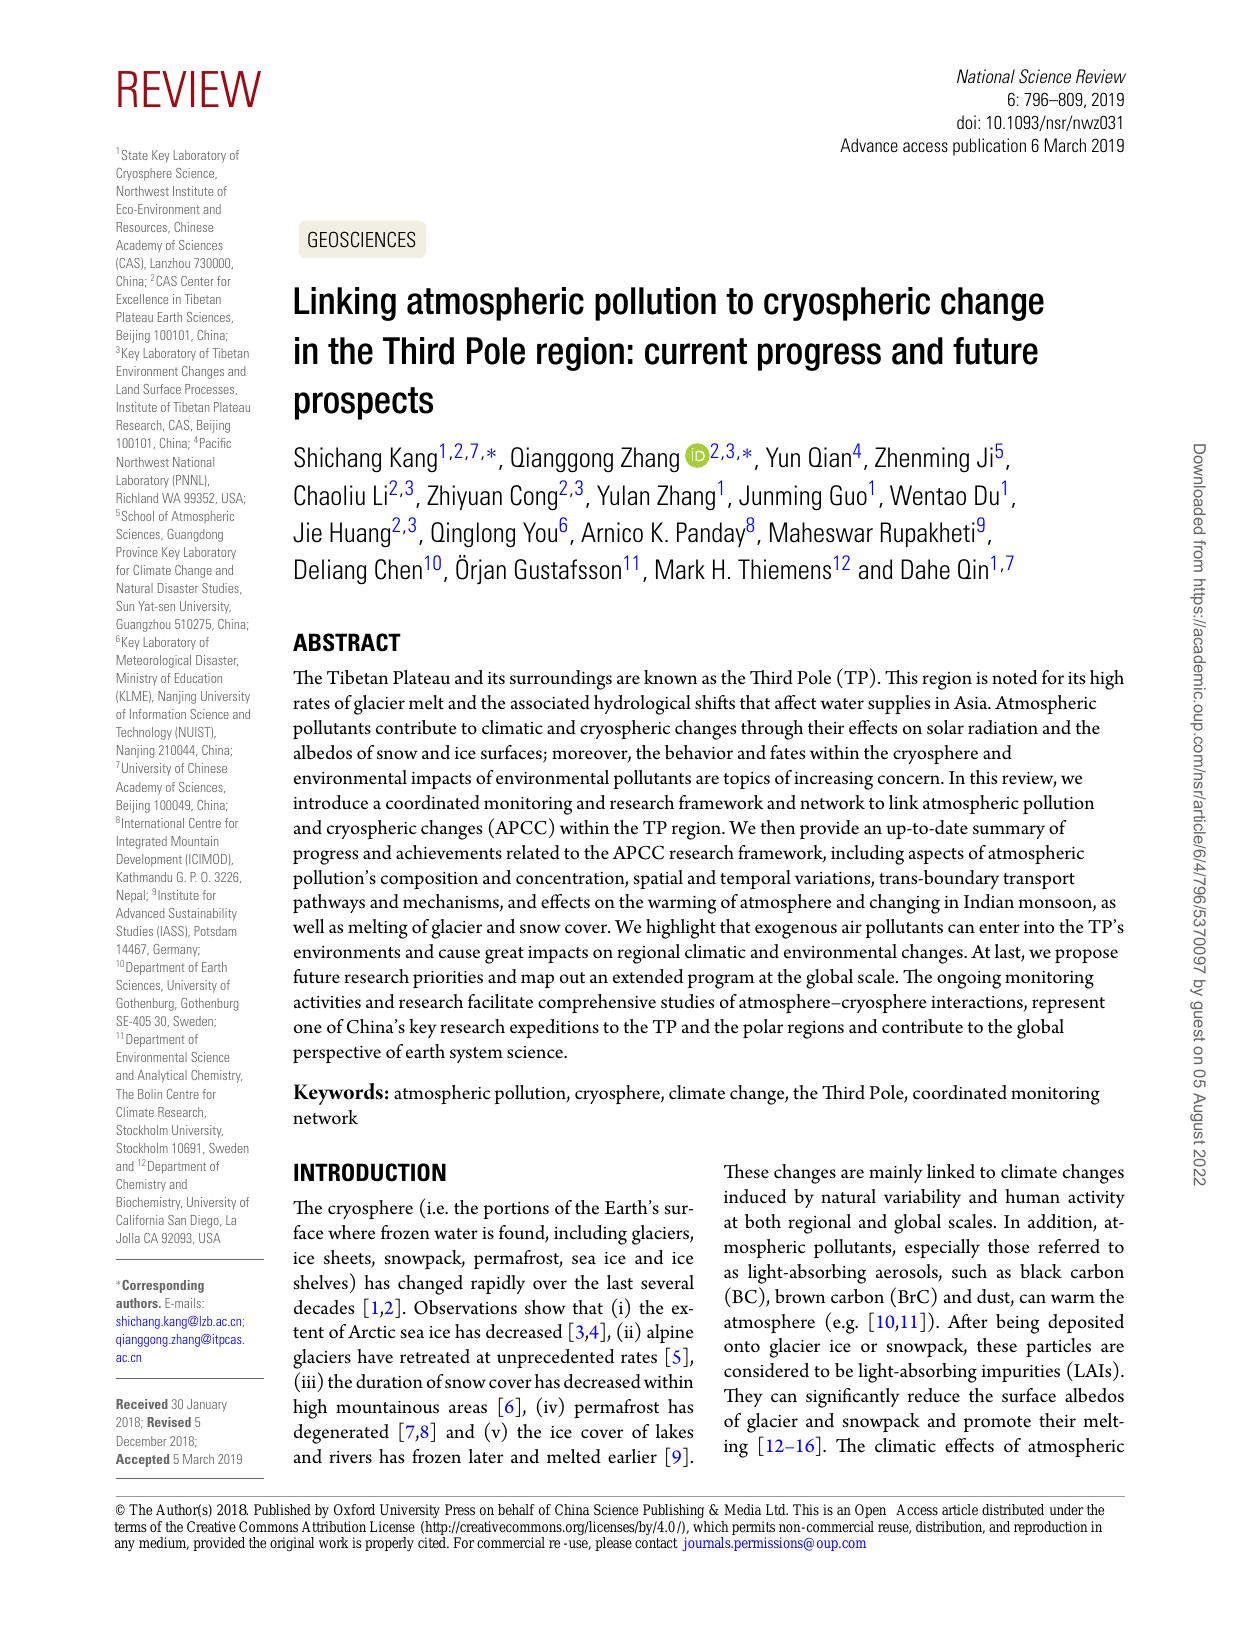 Linking atmospheric pollution to cryospheric change in the Third Pole region: current progress and future prospects